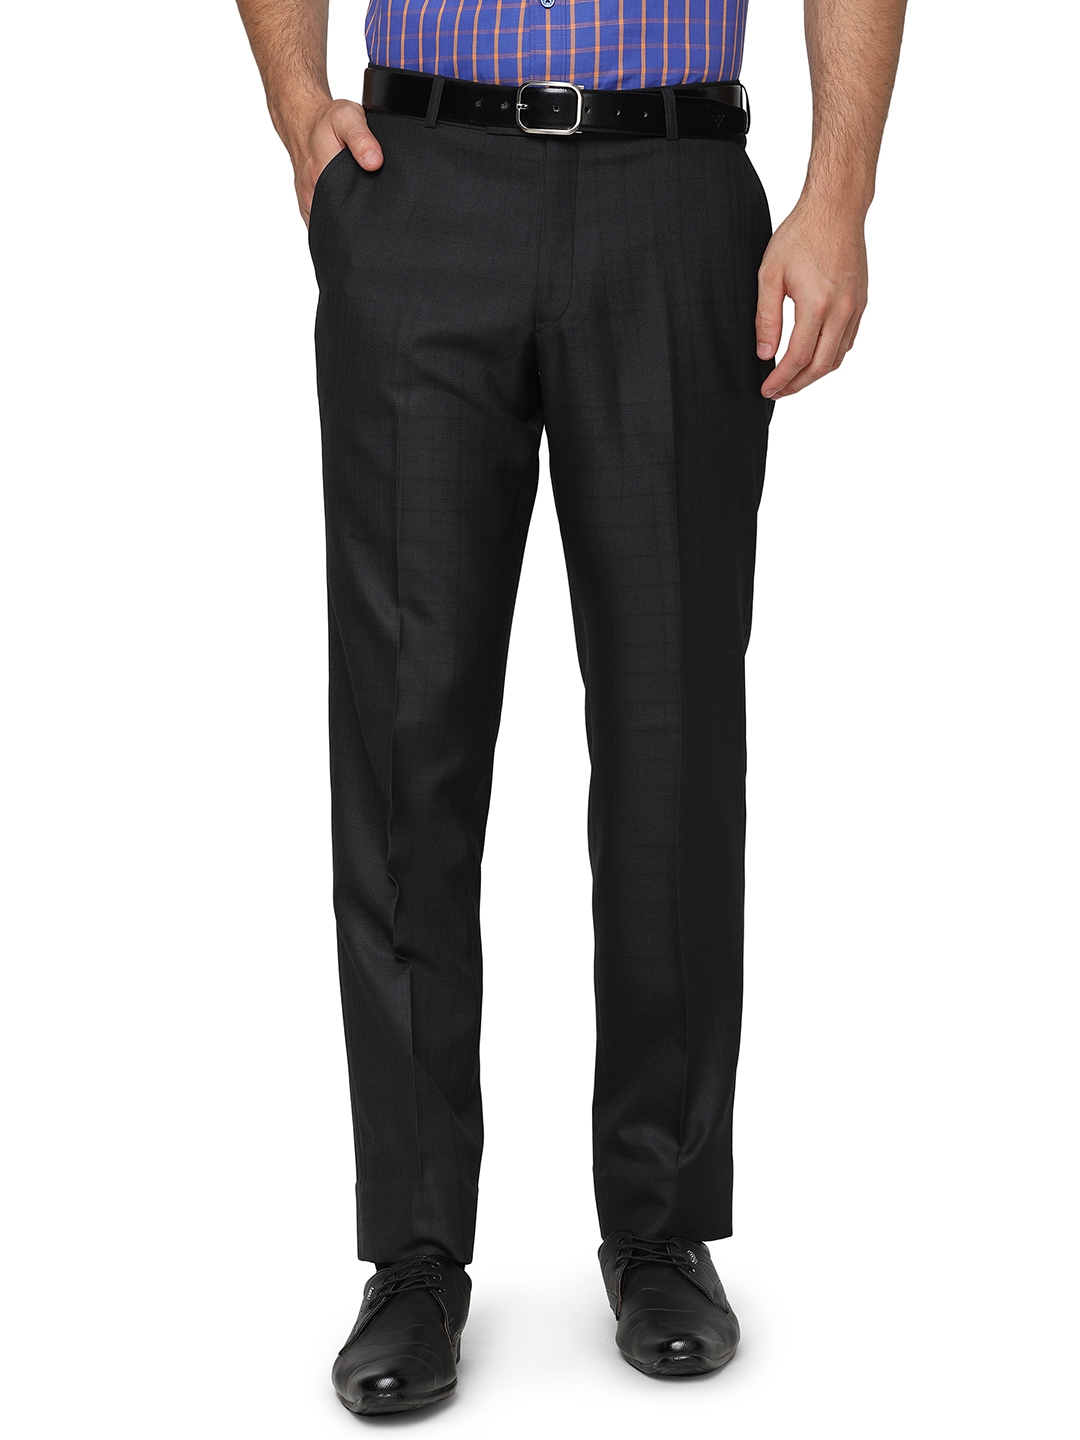 Black & Grey Checked Classic Fit Formal Trouser | Greenfibre